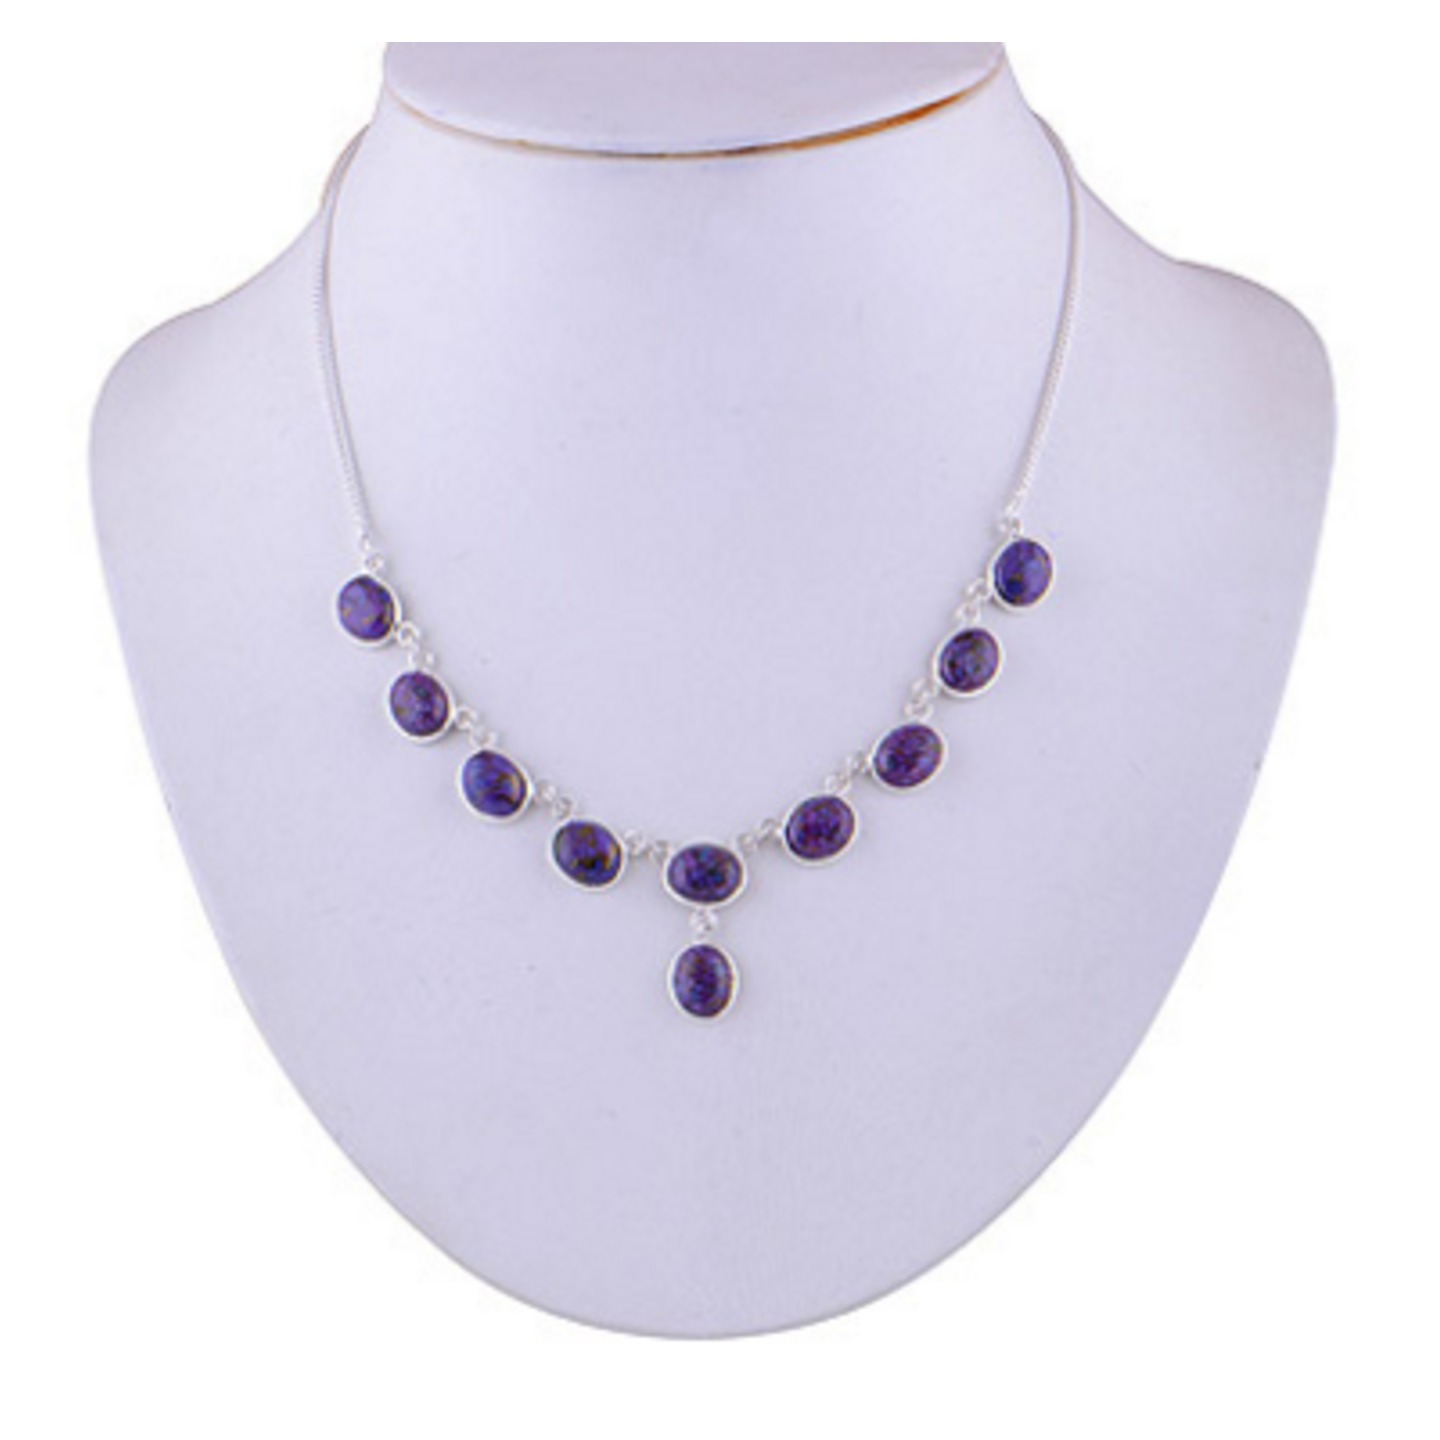 The Purple Turquoise Silver Necklace